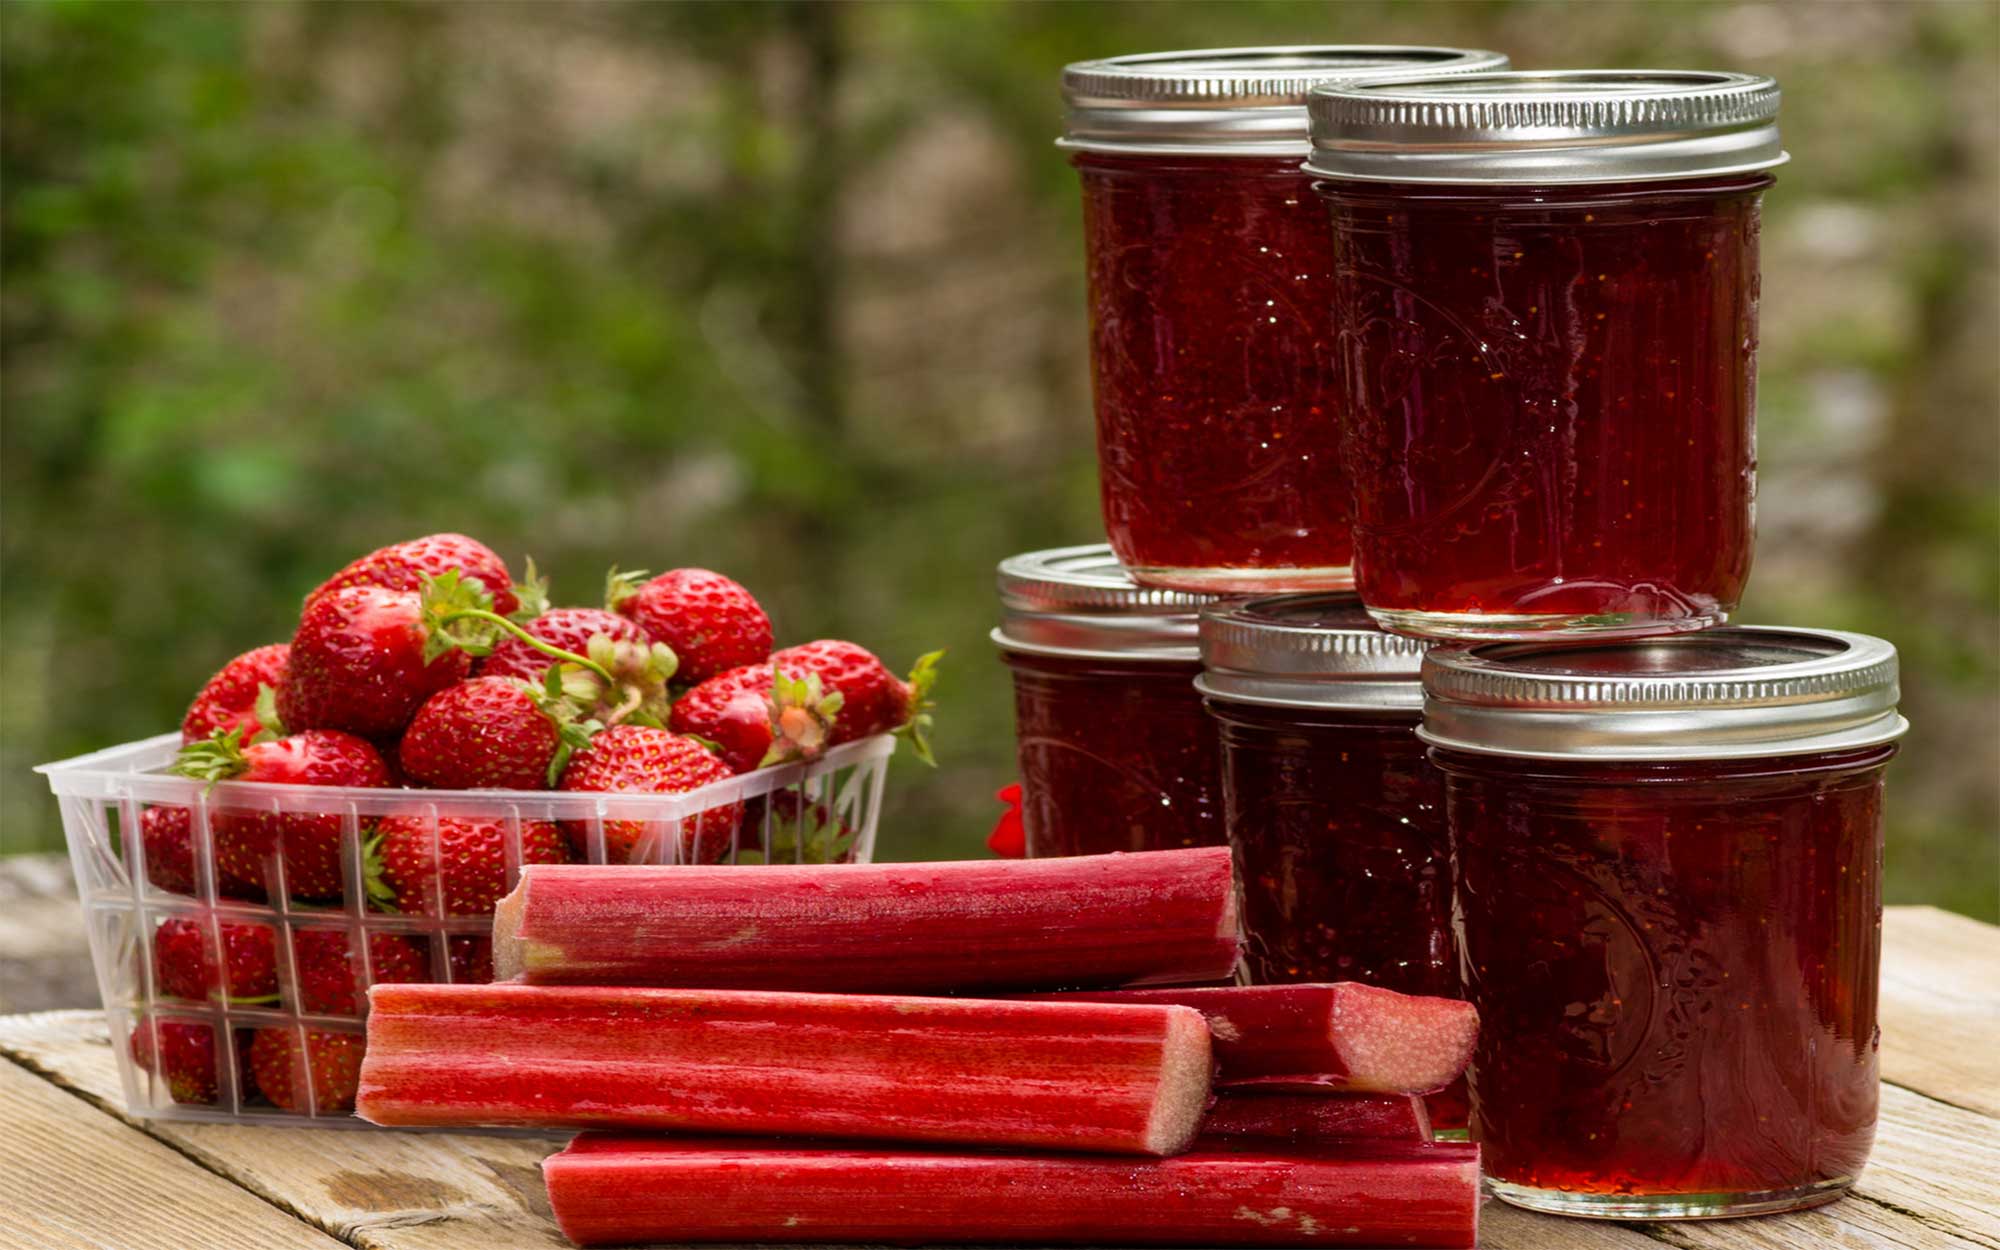 Strawberries, rhubarb, and five jars of strawberry-rhubarb jam on a picnic table.